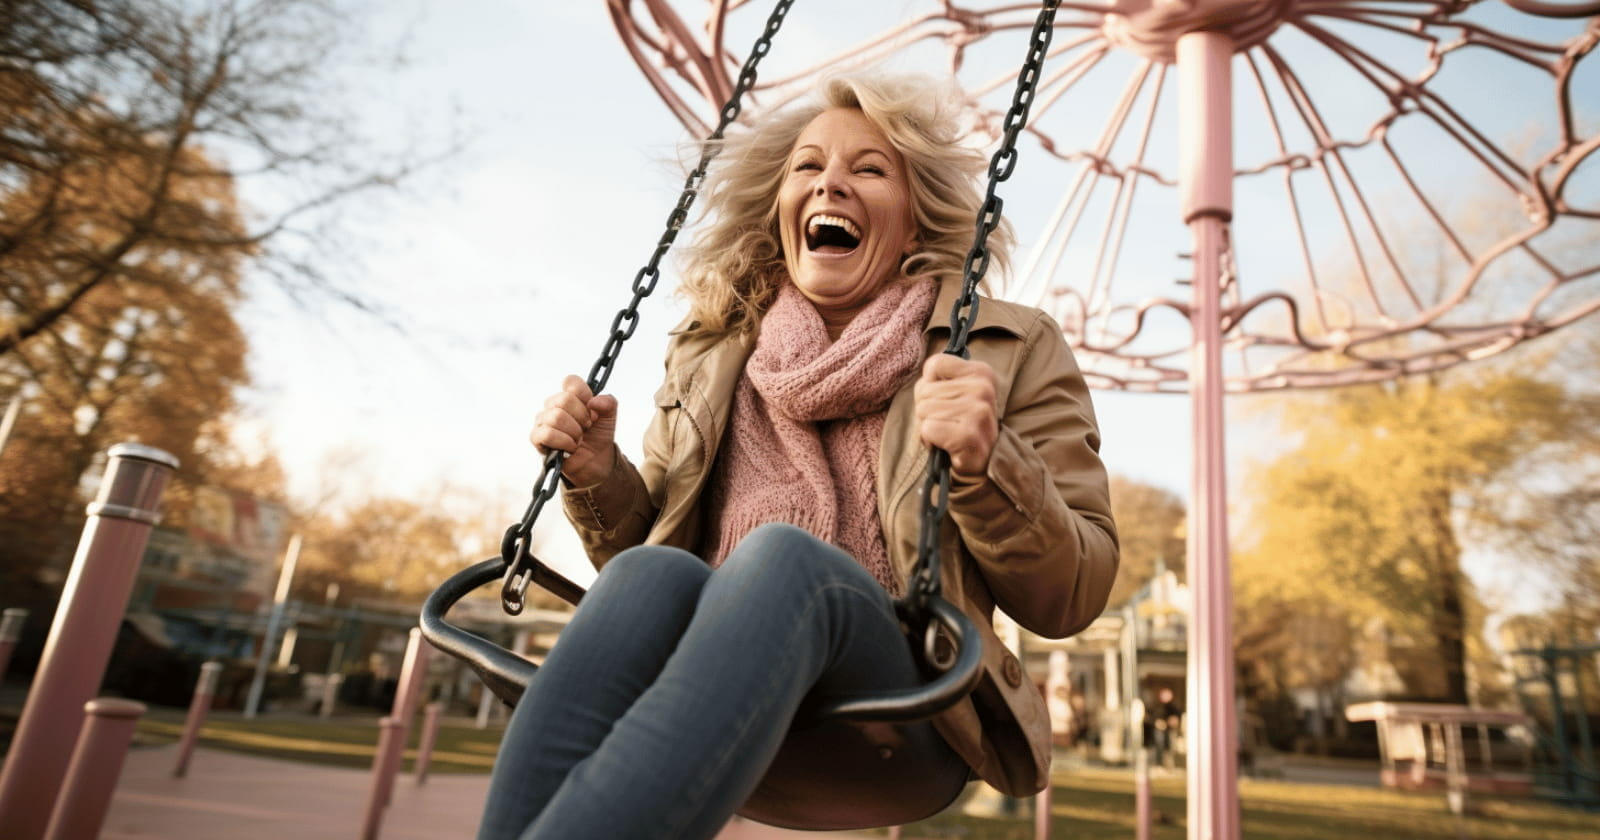 Middle aged woman on a swing having fun and feeling youthful